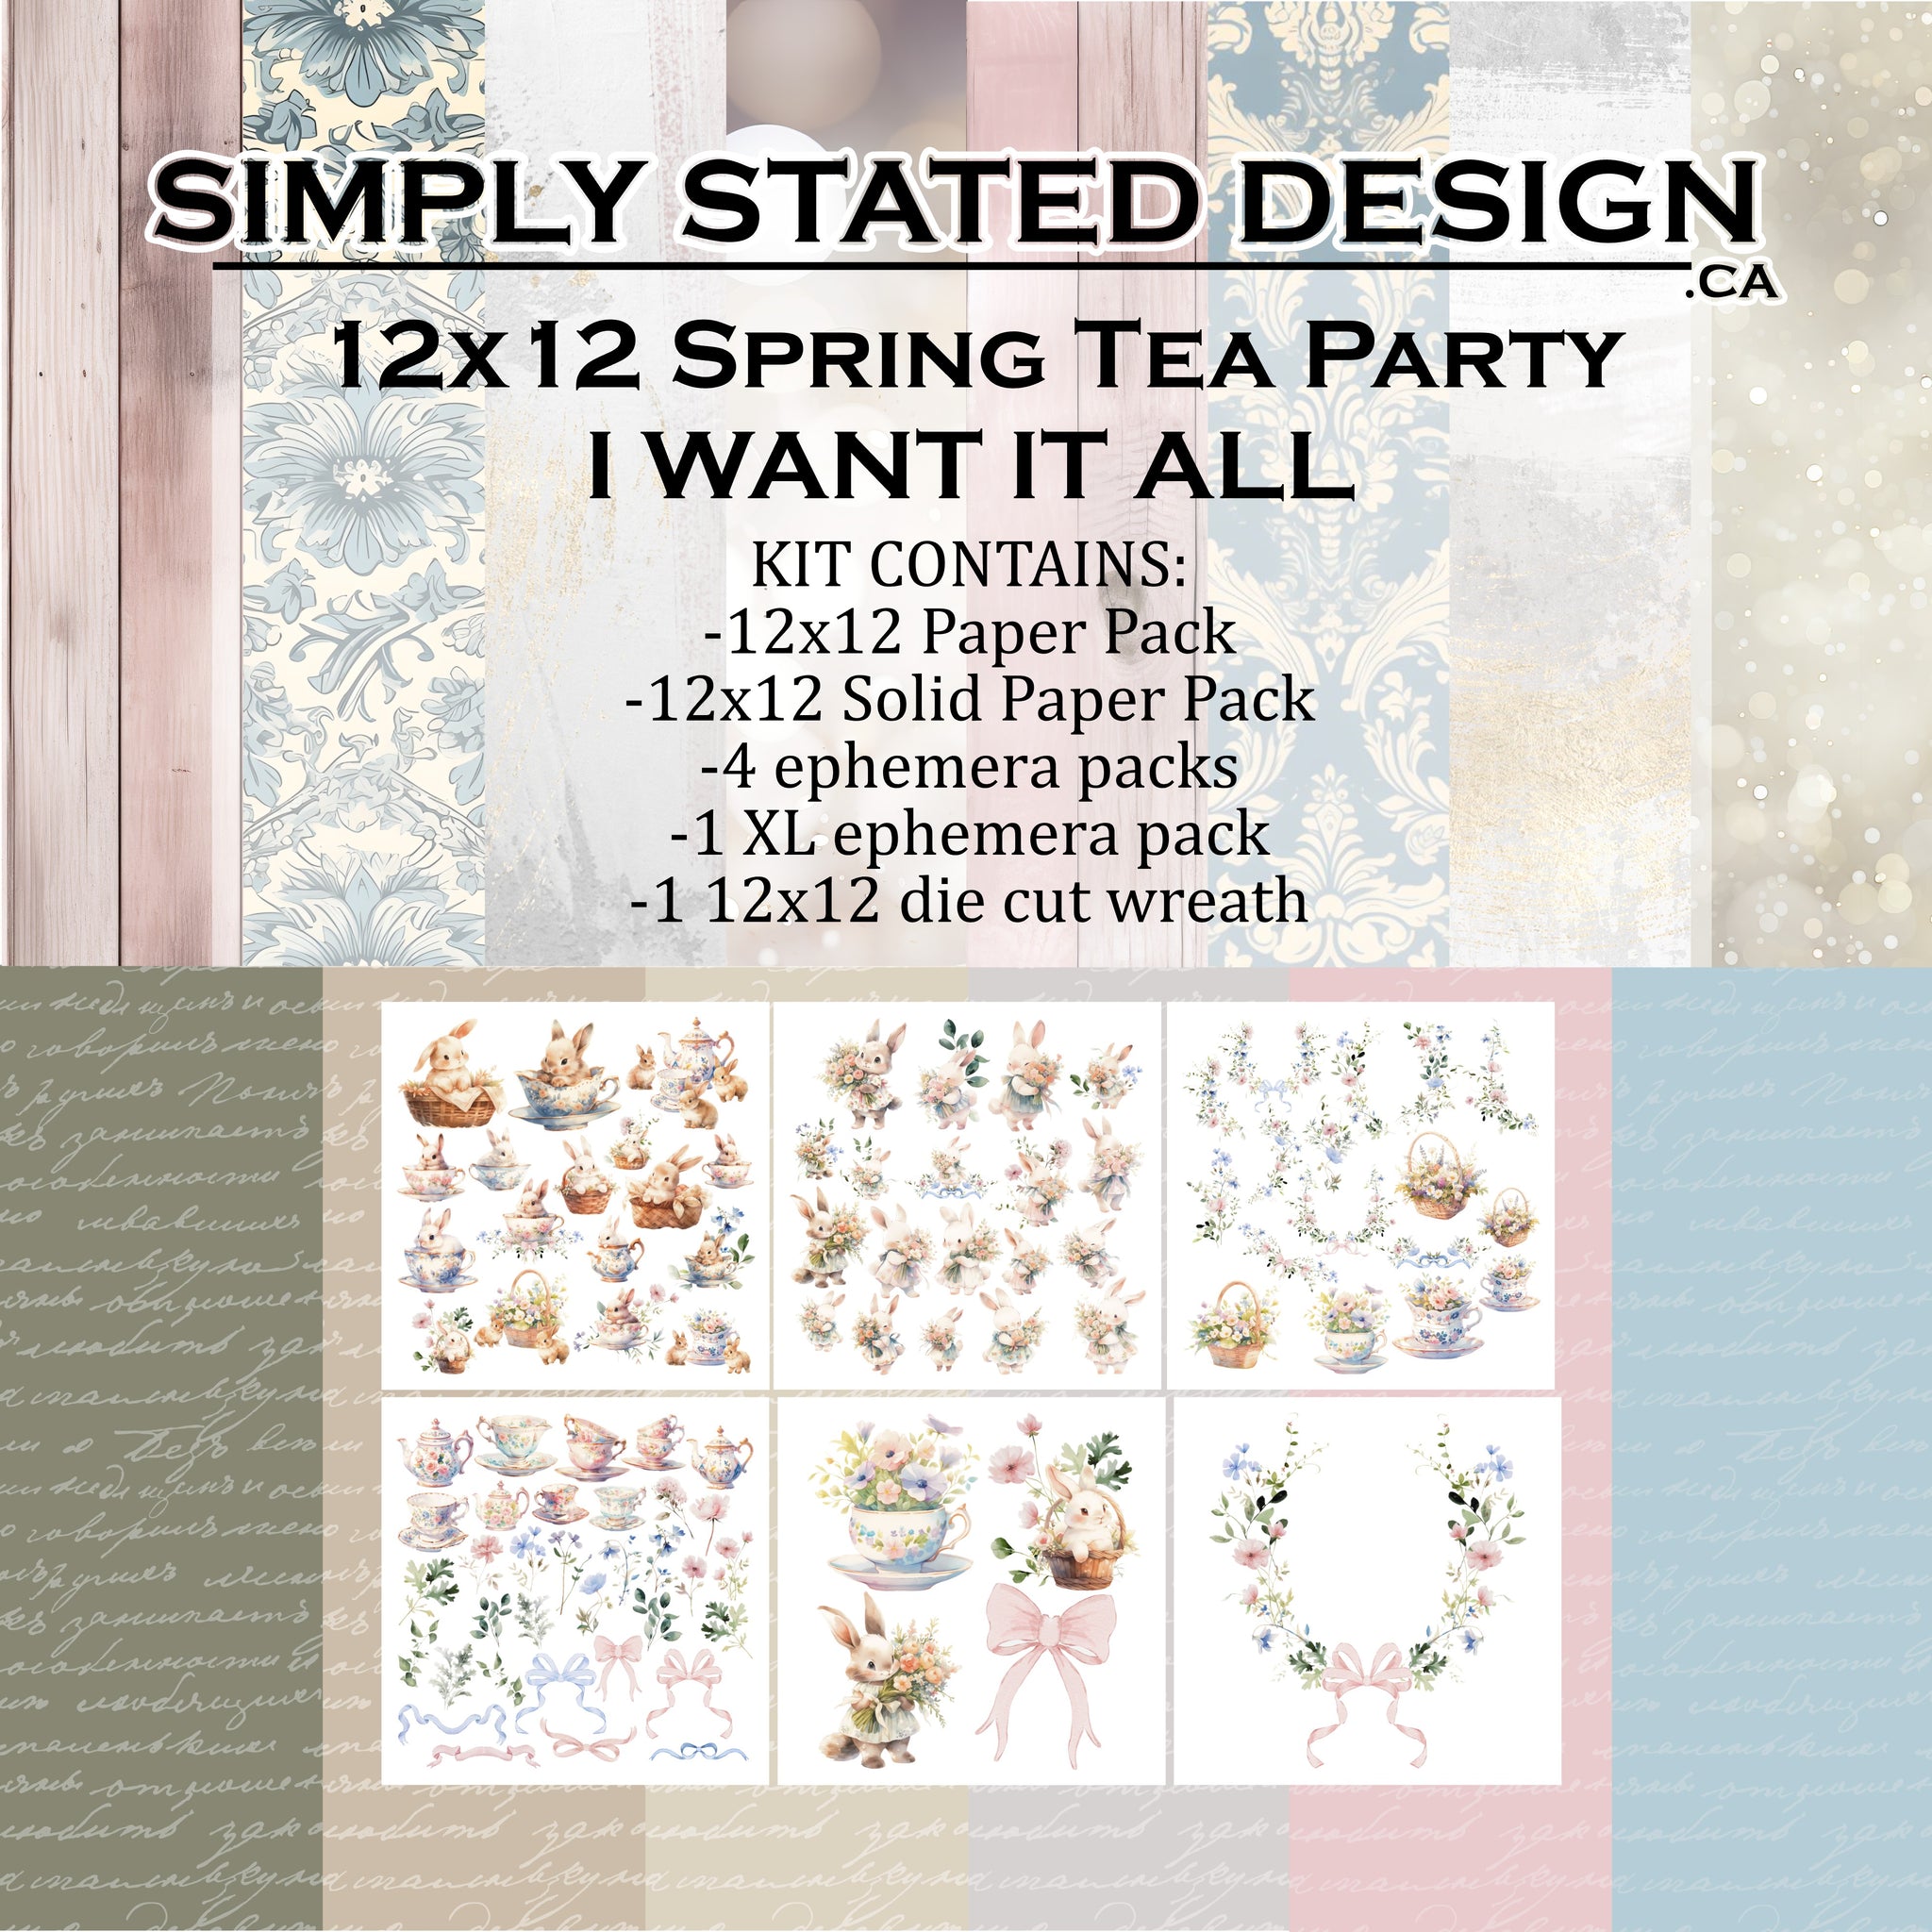 I Want It All - Spring Tea Party